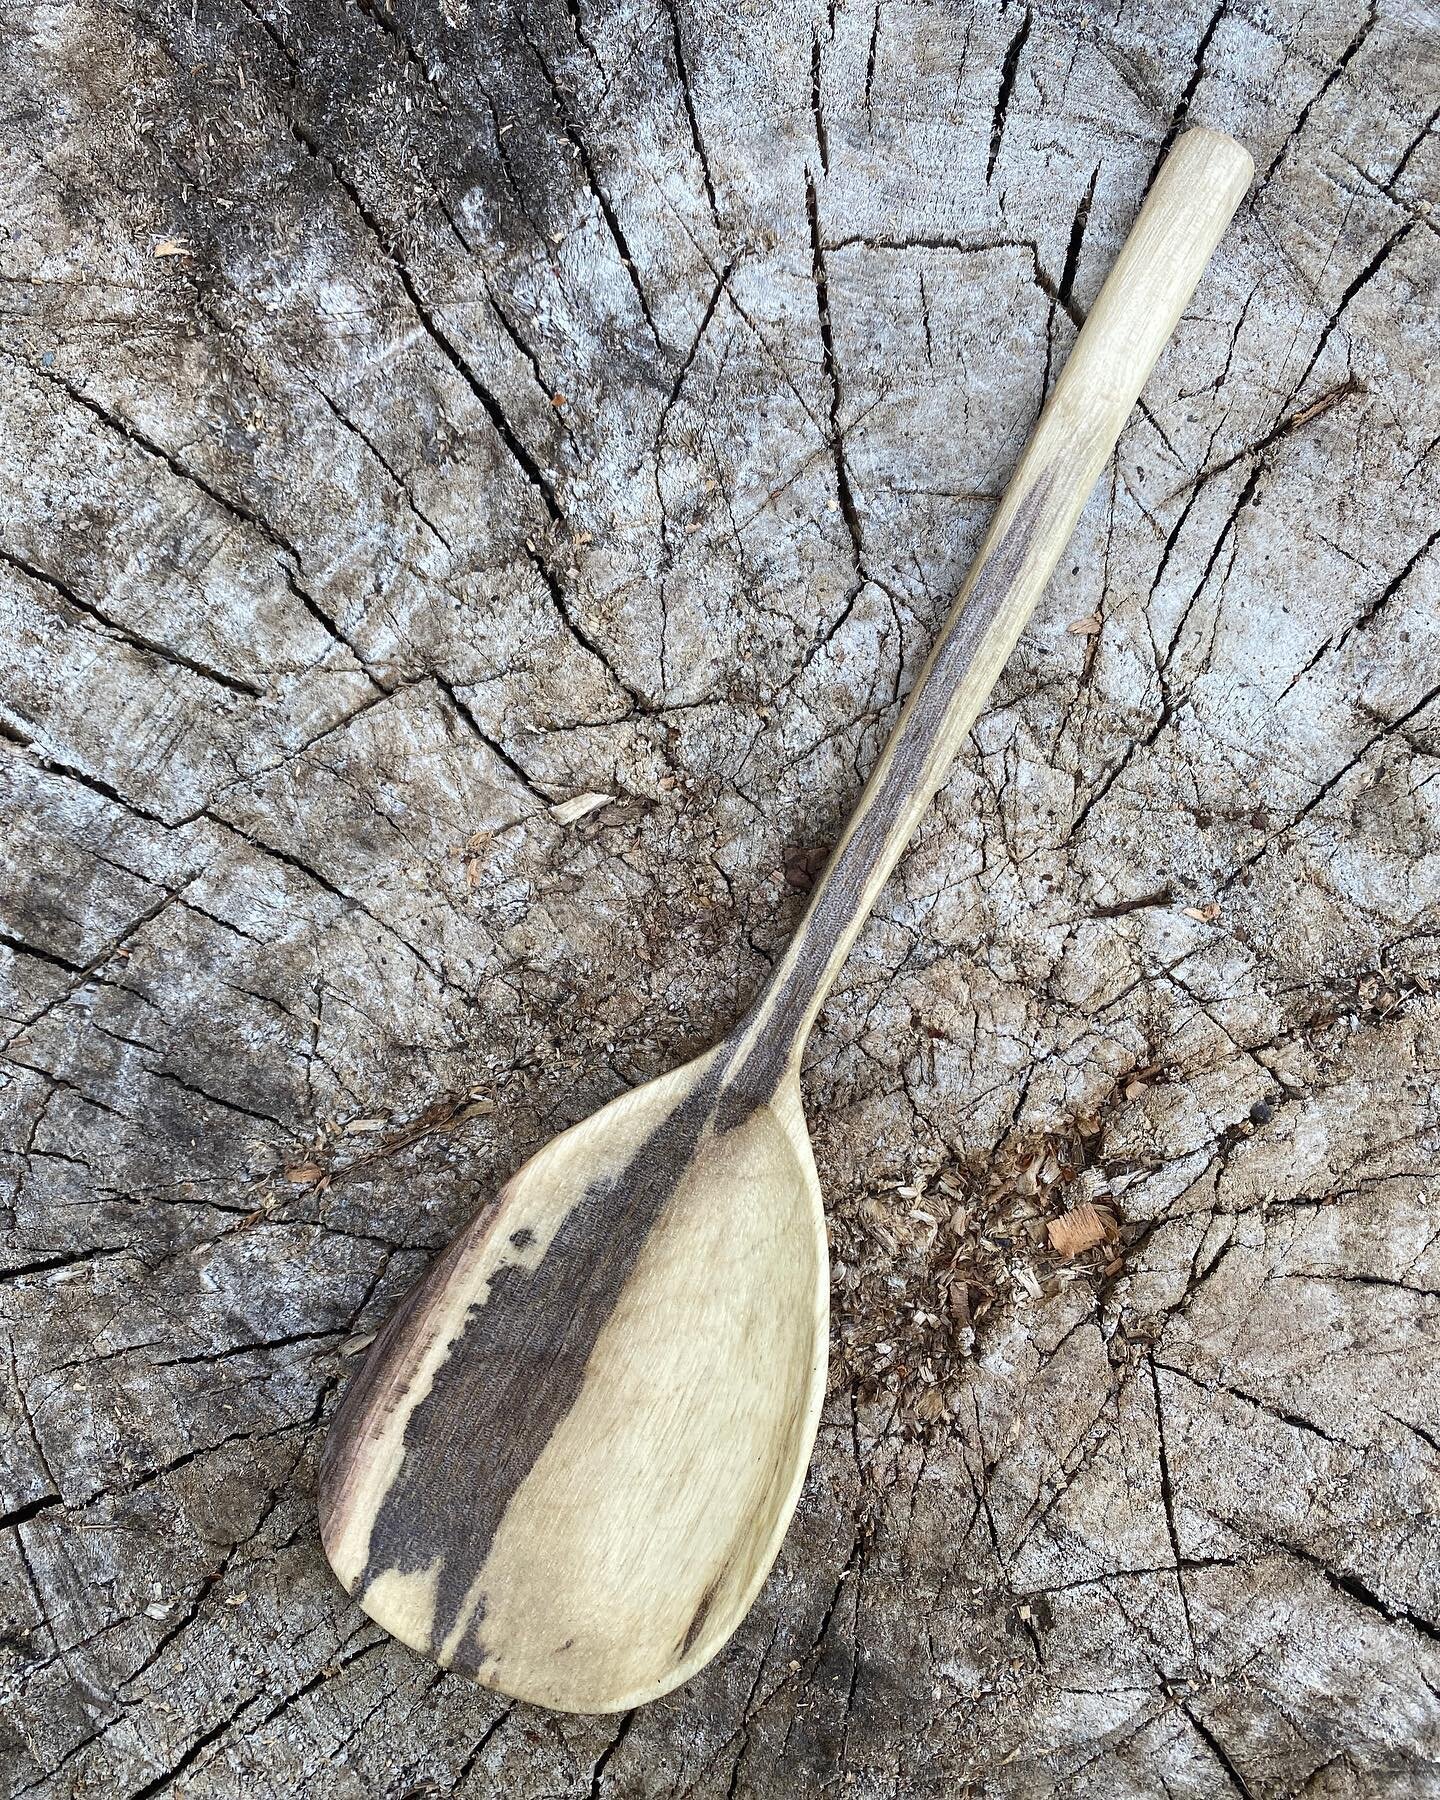 Hey everyone! I just added a batch of wooden utensils to my website. If you are looking for a gift, a piece for yourself, or if you&rsquo;d just like to browse, please check them out! My website is firecraftnw.com or you can find the link in my bio. 